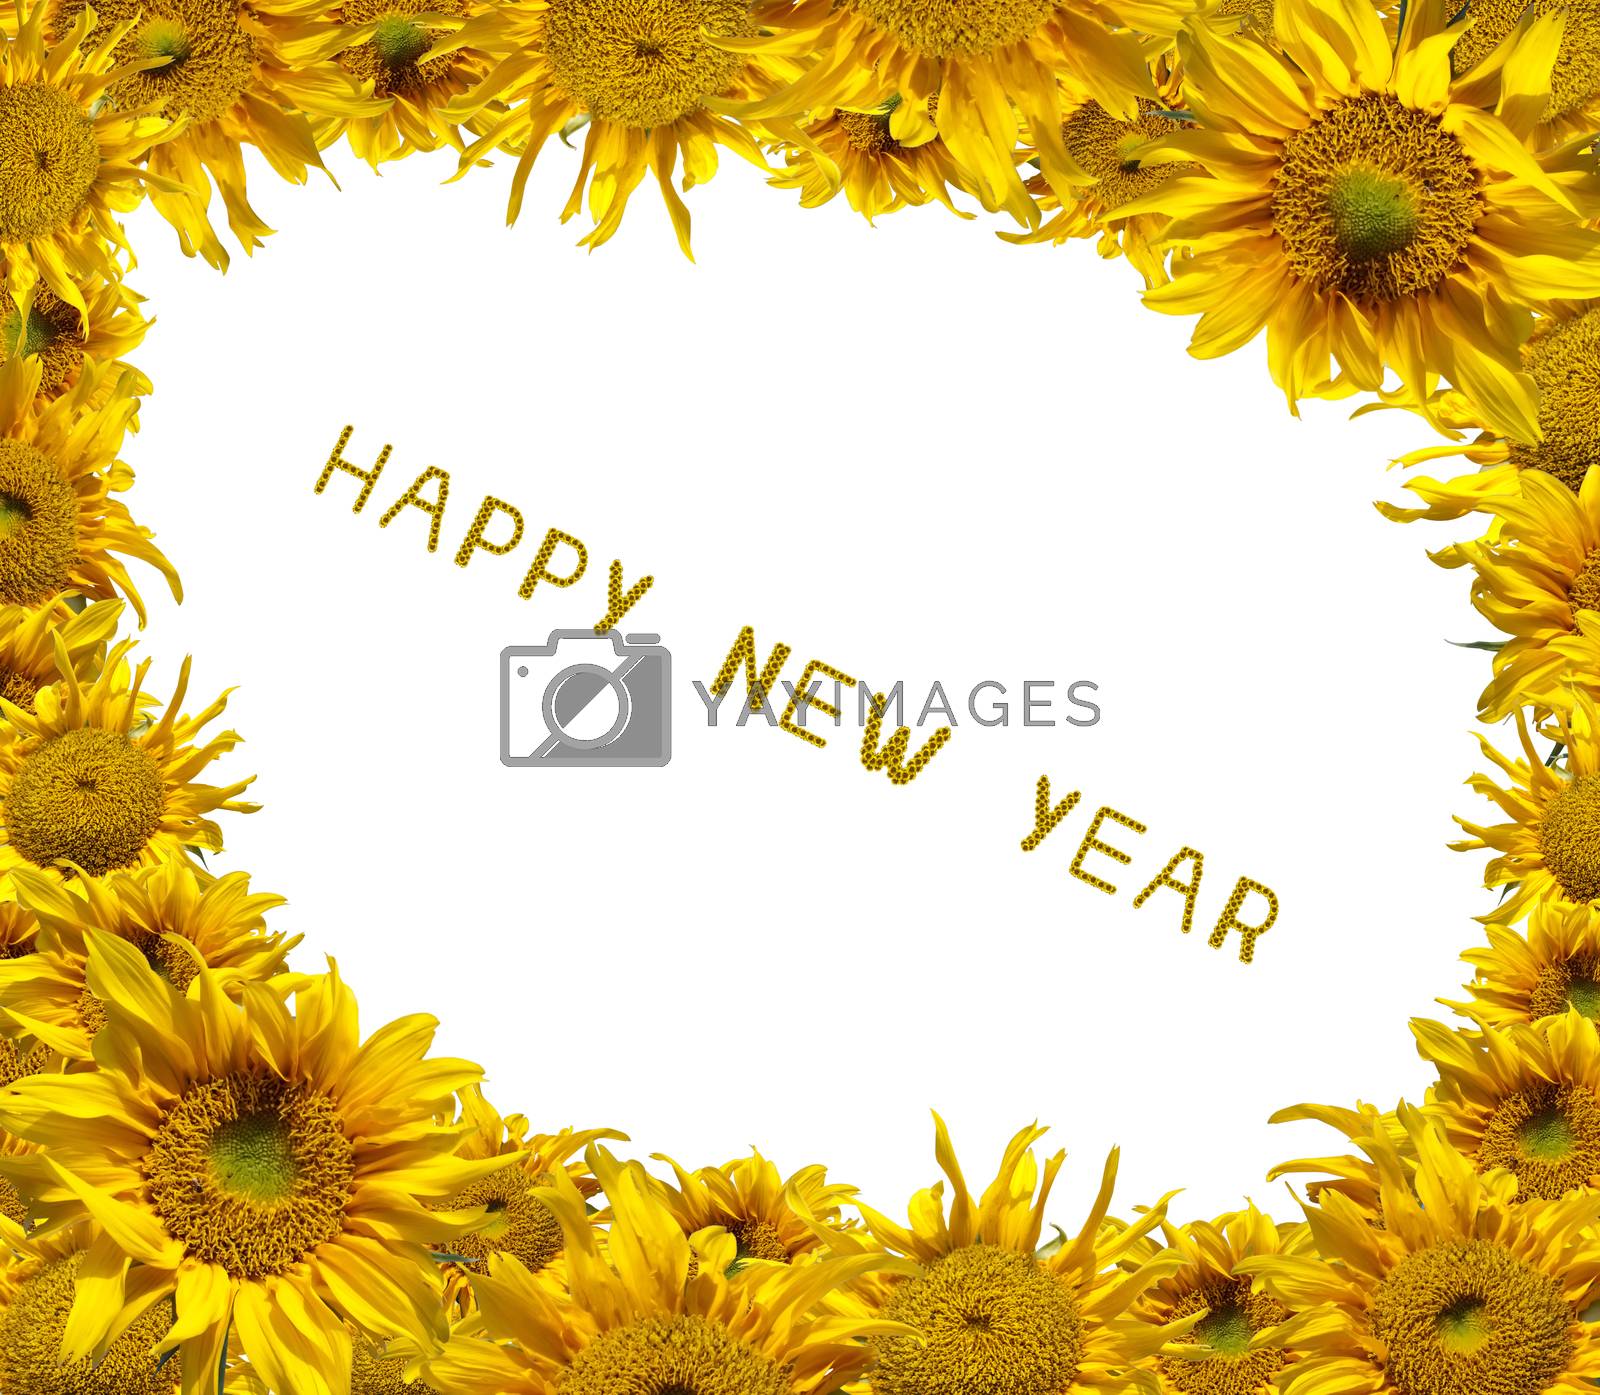 Royalty free image of Sunflowers Happy New Year by Exsodus